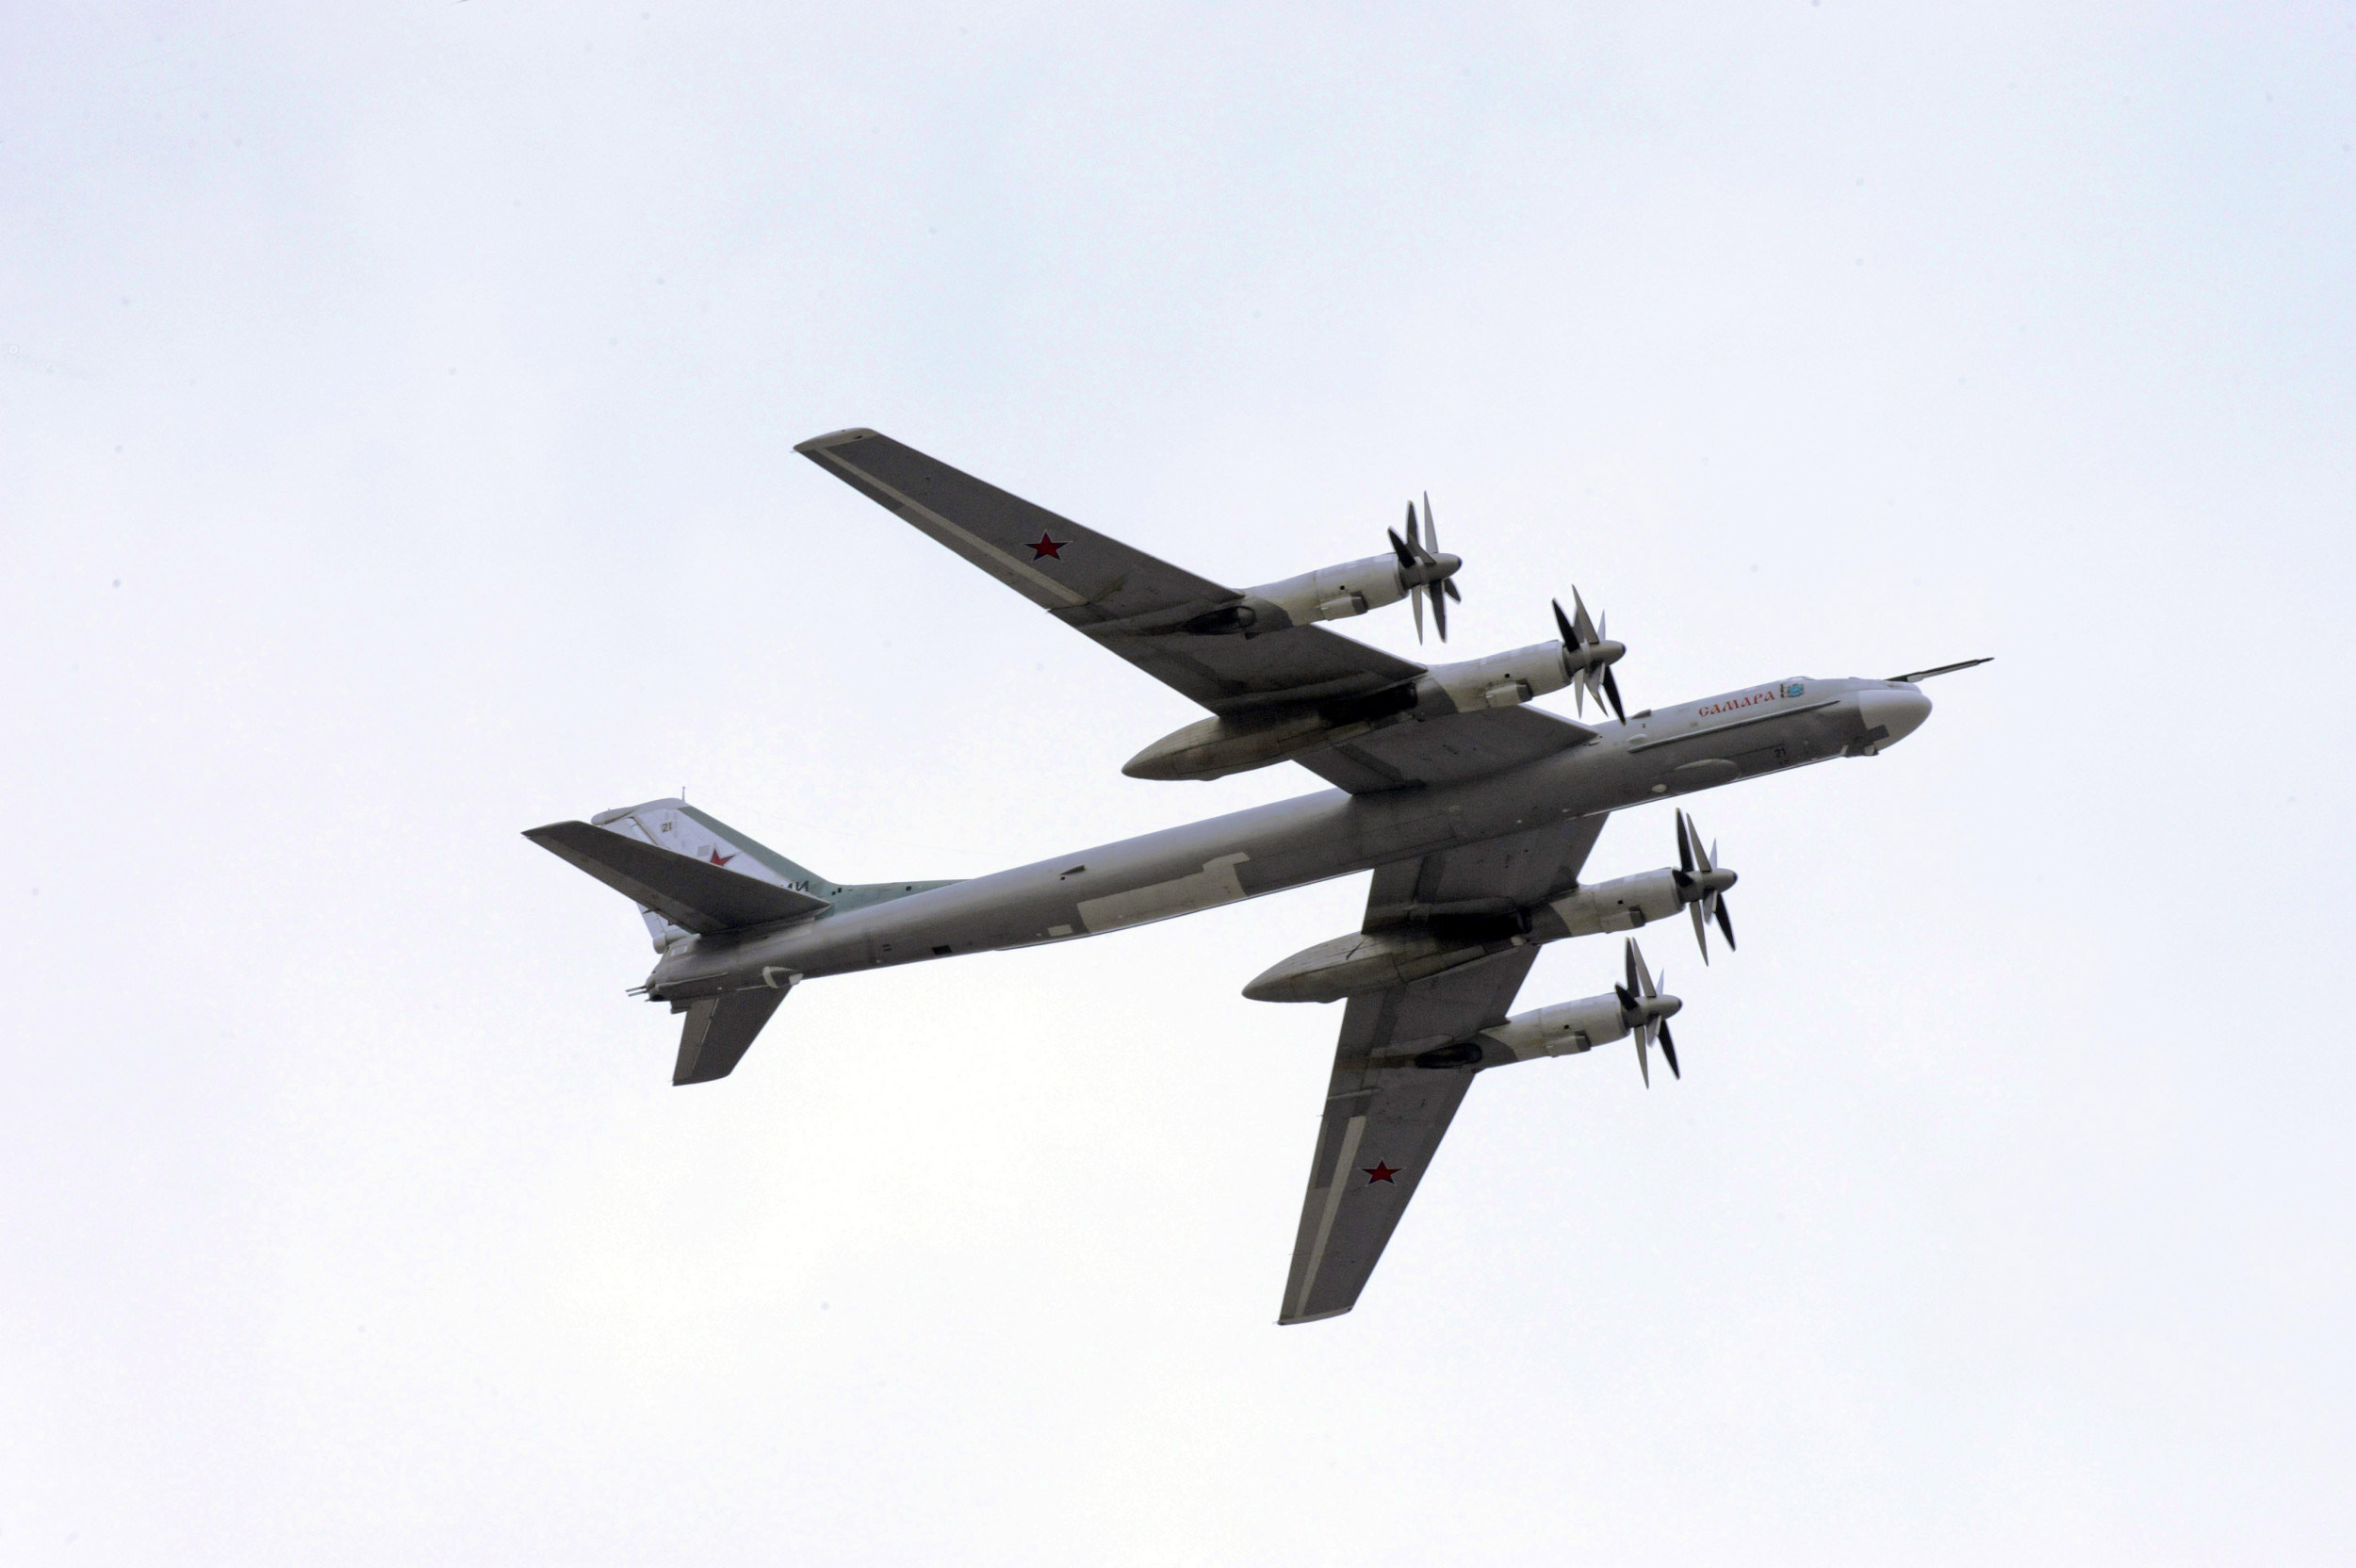 Russia's Nuclear Bombers Patrol Waters Near US Allies